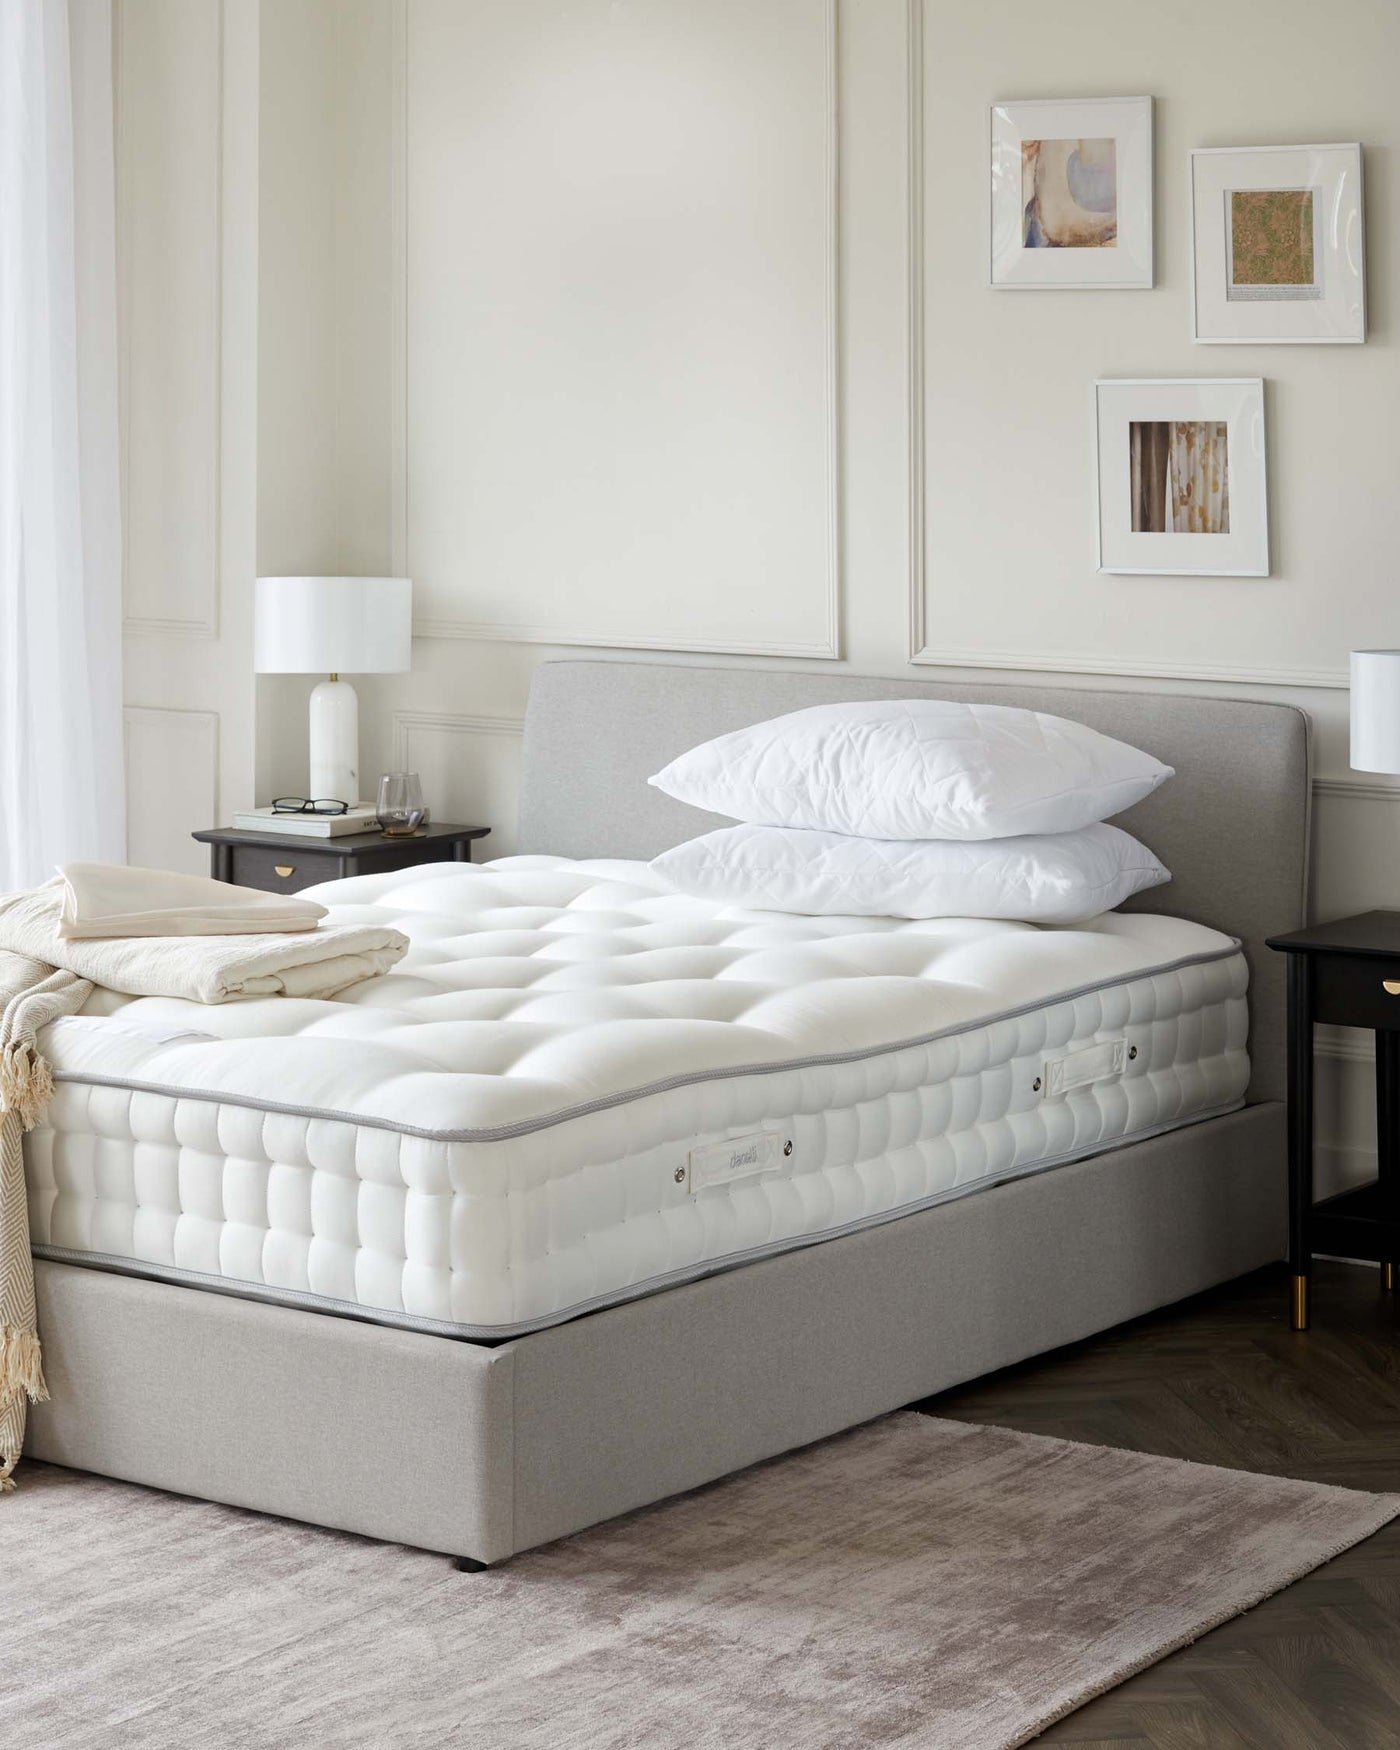 Plush, upholstered queen-sized bed in a neutral grey fabric with a tailored, slightly curved headboard and matching divan base. The bed is adorned with a thick, white quilted mattress and a pair of fluffy white pillows. A small, dark bedside table with a lower shelf supports a modern white lamp. The room has a soft grey area rug partially under the bed, and the walls are decorated with simple framed artwork.